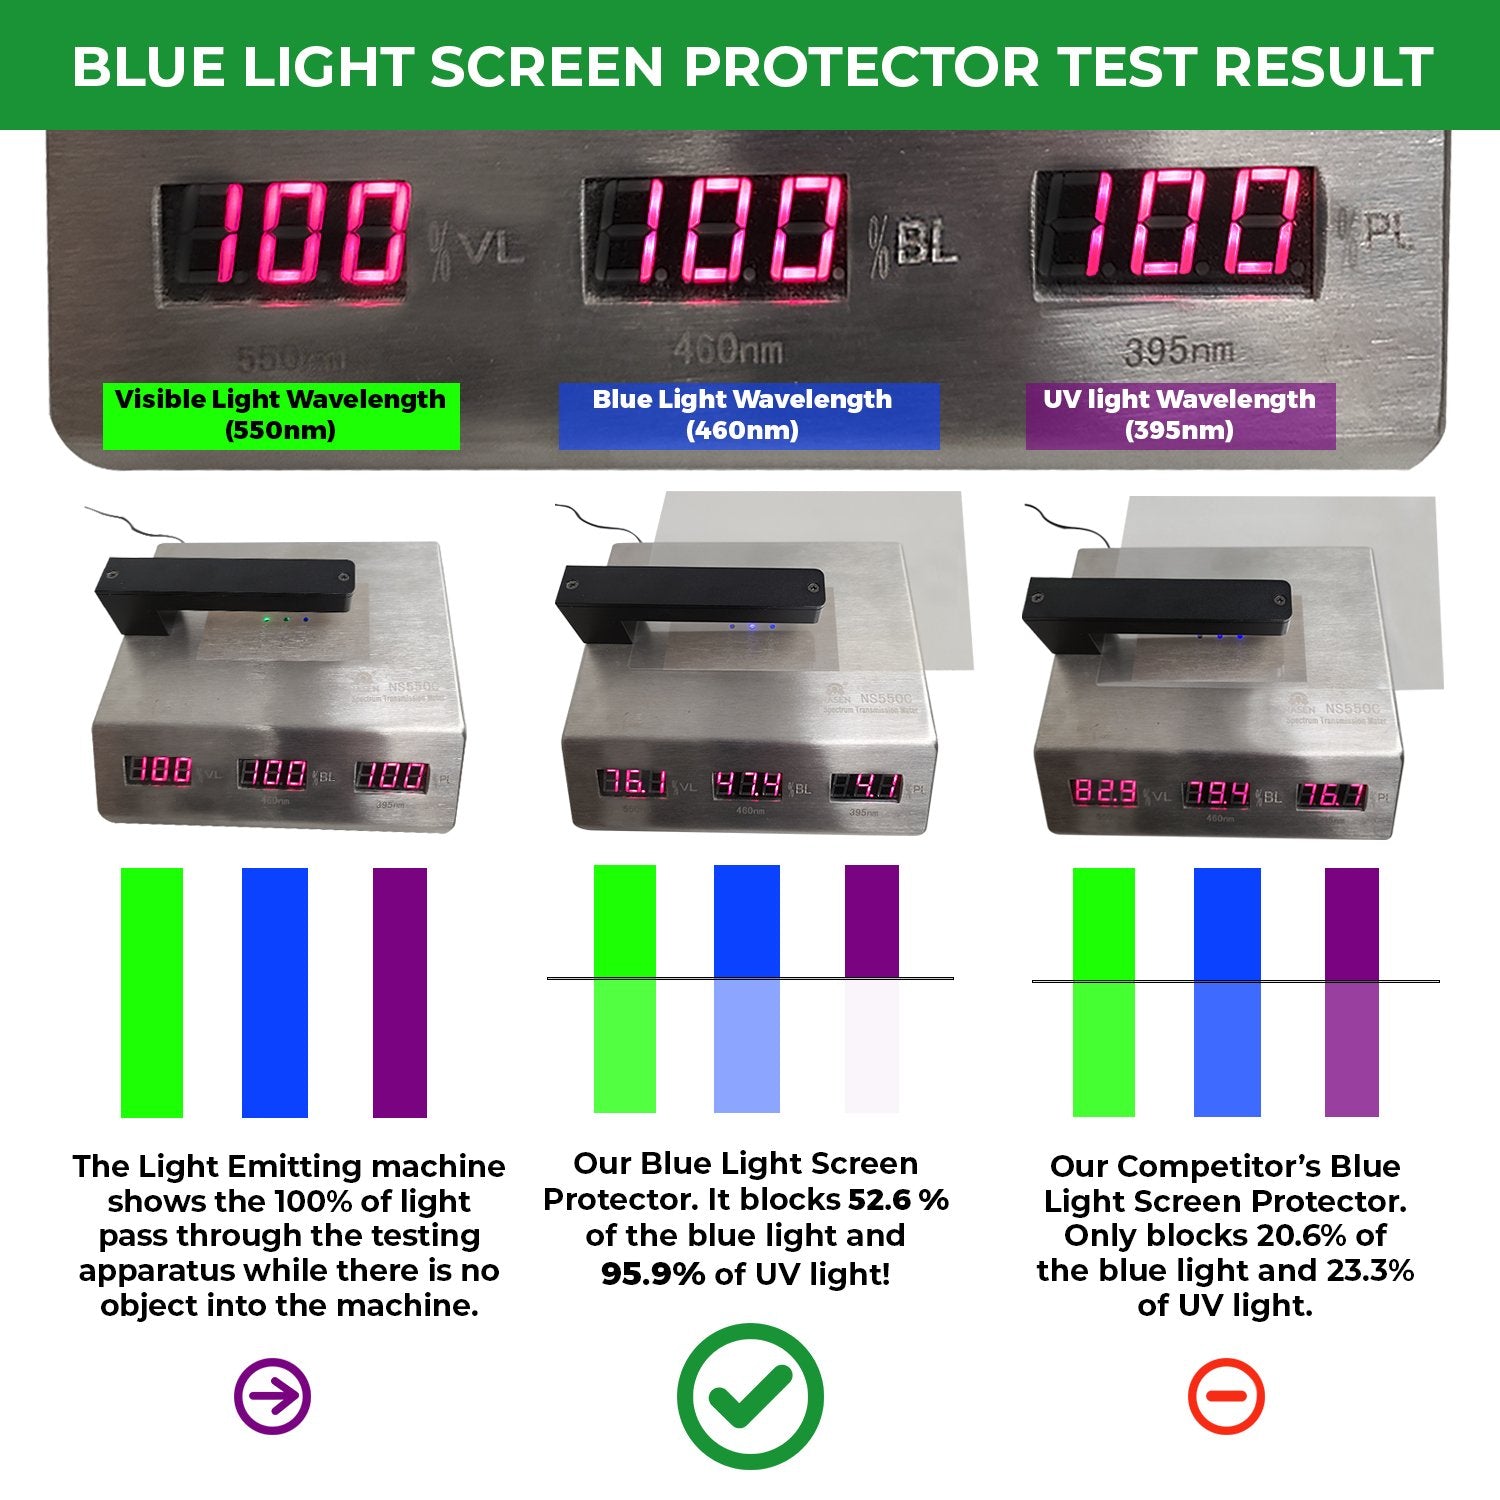 Anti Blue Light and Anti Glare Screen Protector (3 Pack) for Laptop. Filter Out Blue Light and Relieve Computer Eye Strain to Help You Sleep Better